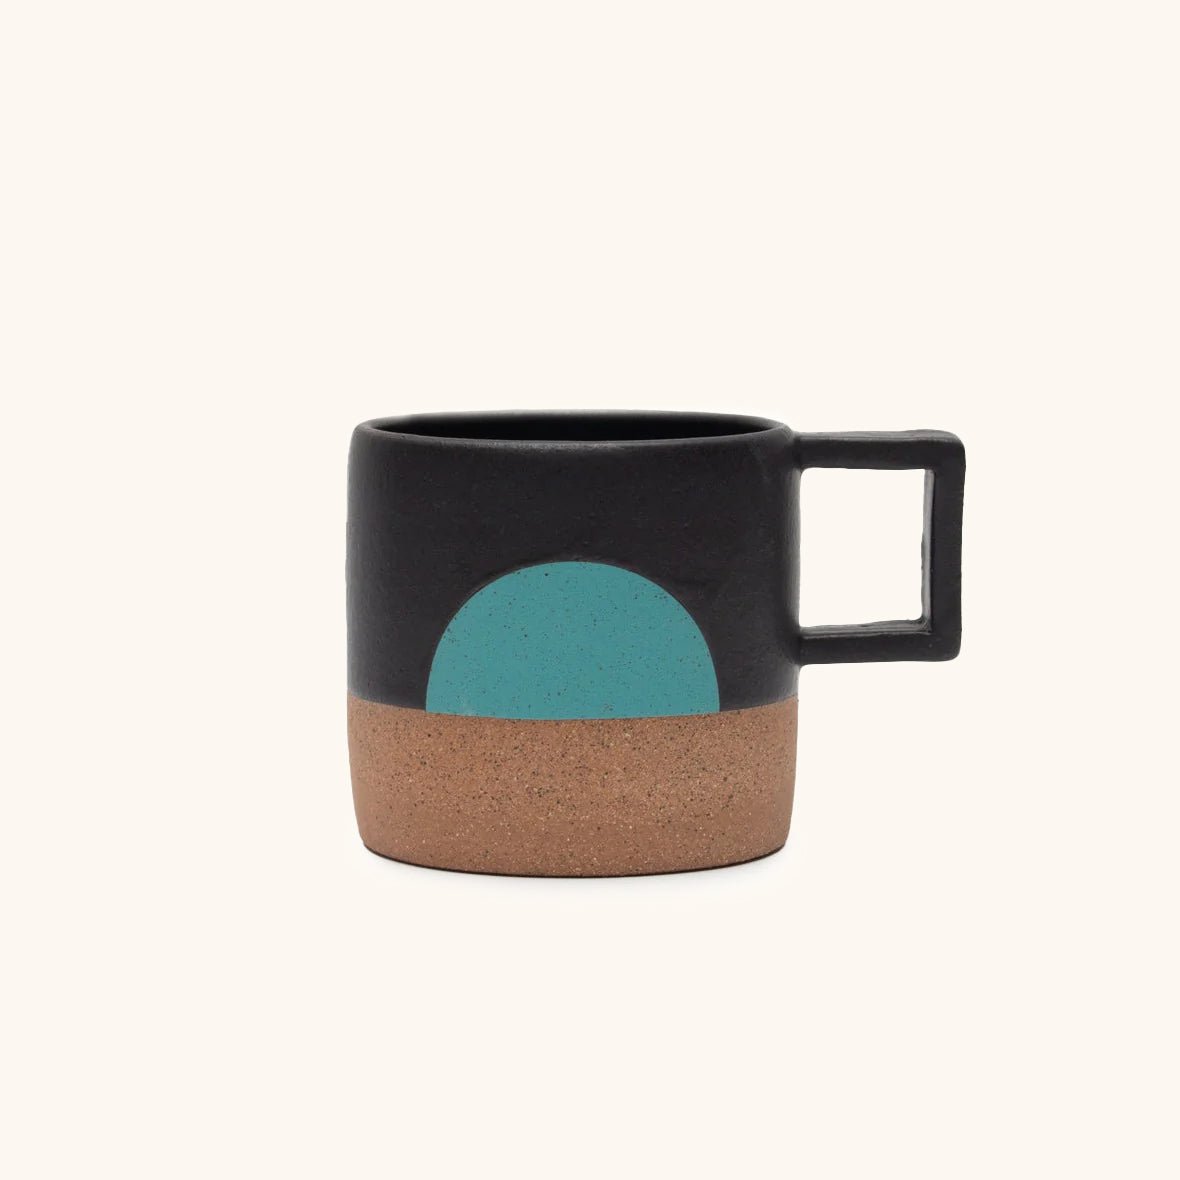 Handle Mug with black satin glaze and turquoise half moon illustration. Made in Hood River, Oregon by Wolf Ceramics.